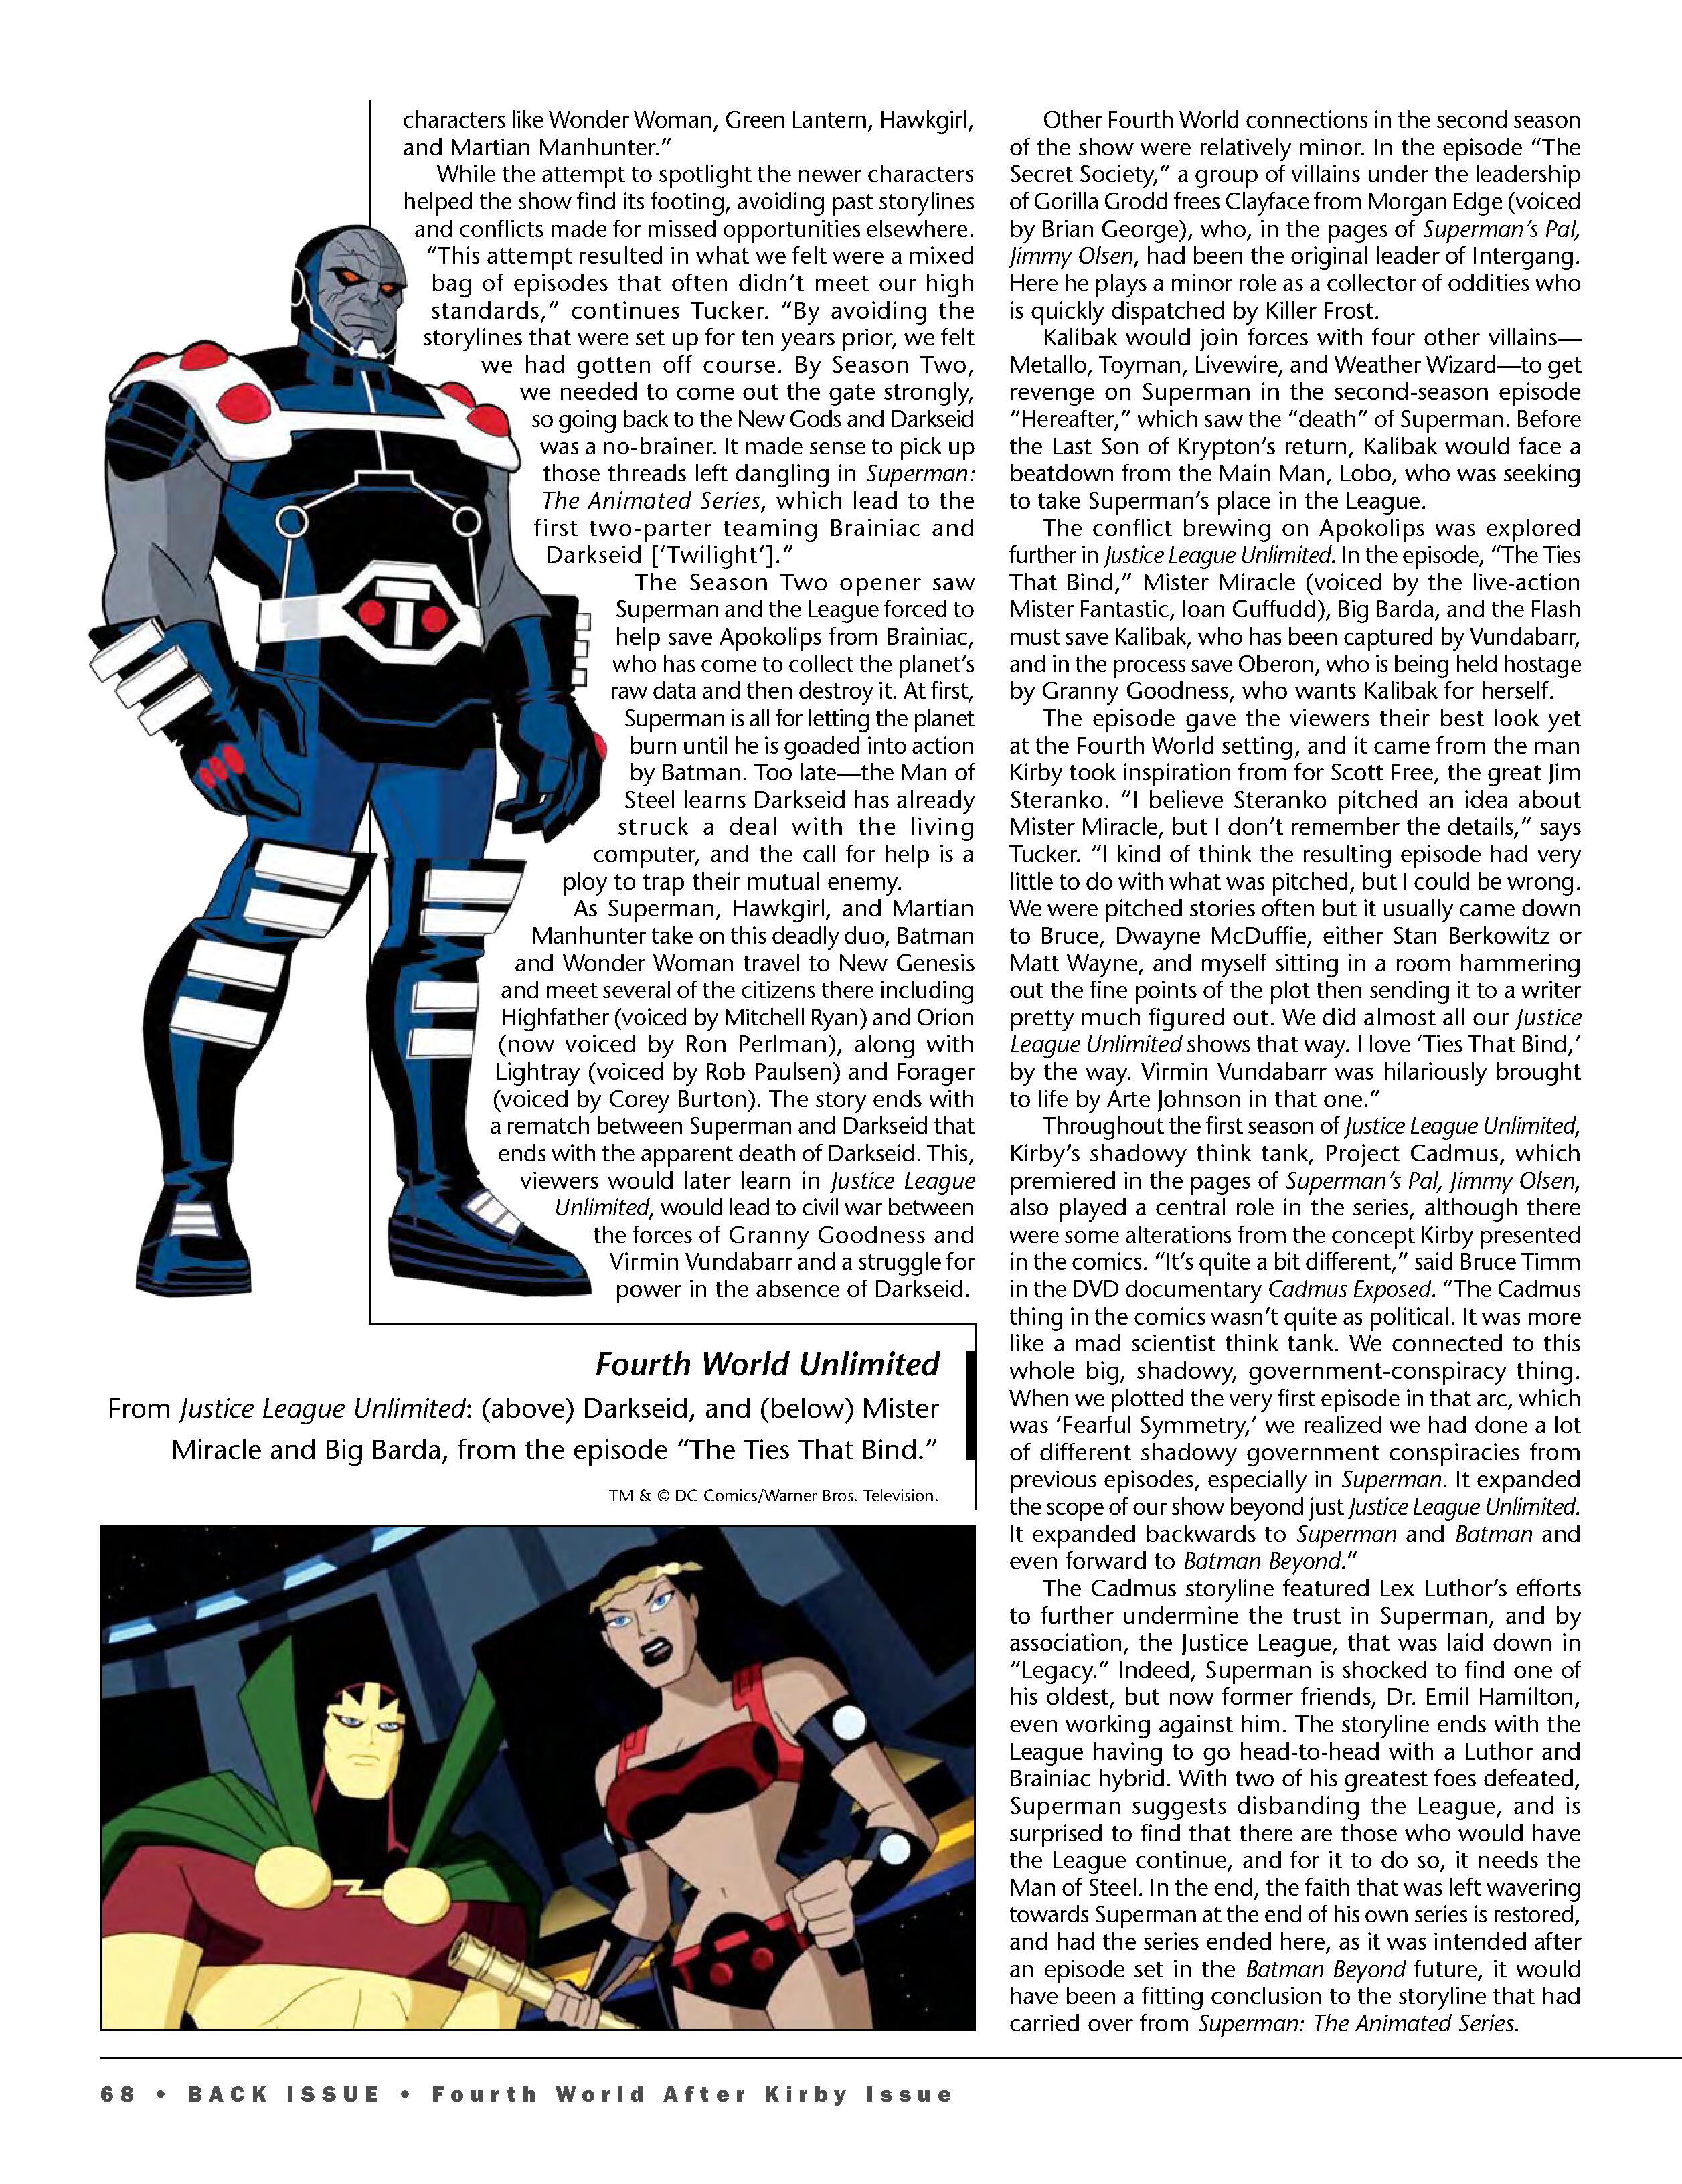 Read online Back Issue comic -  Issue #104 - 70